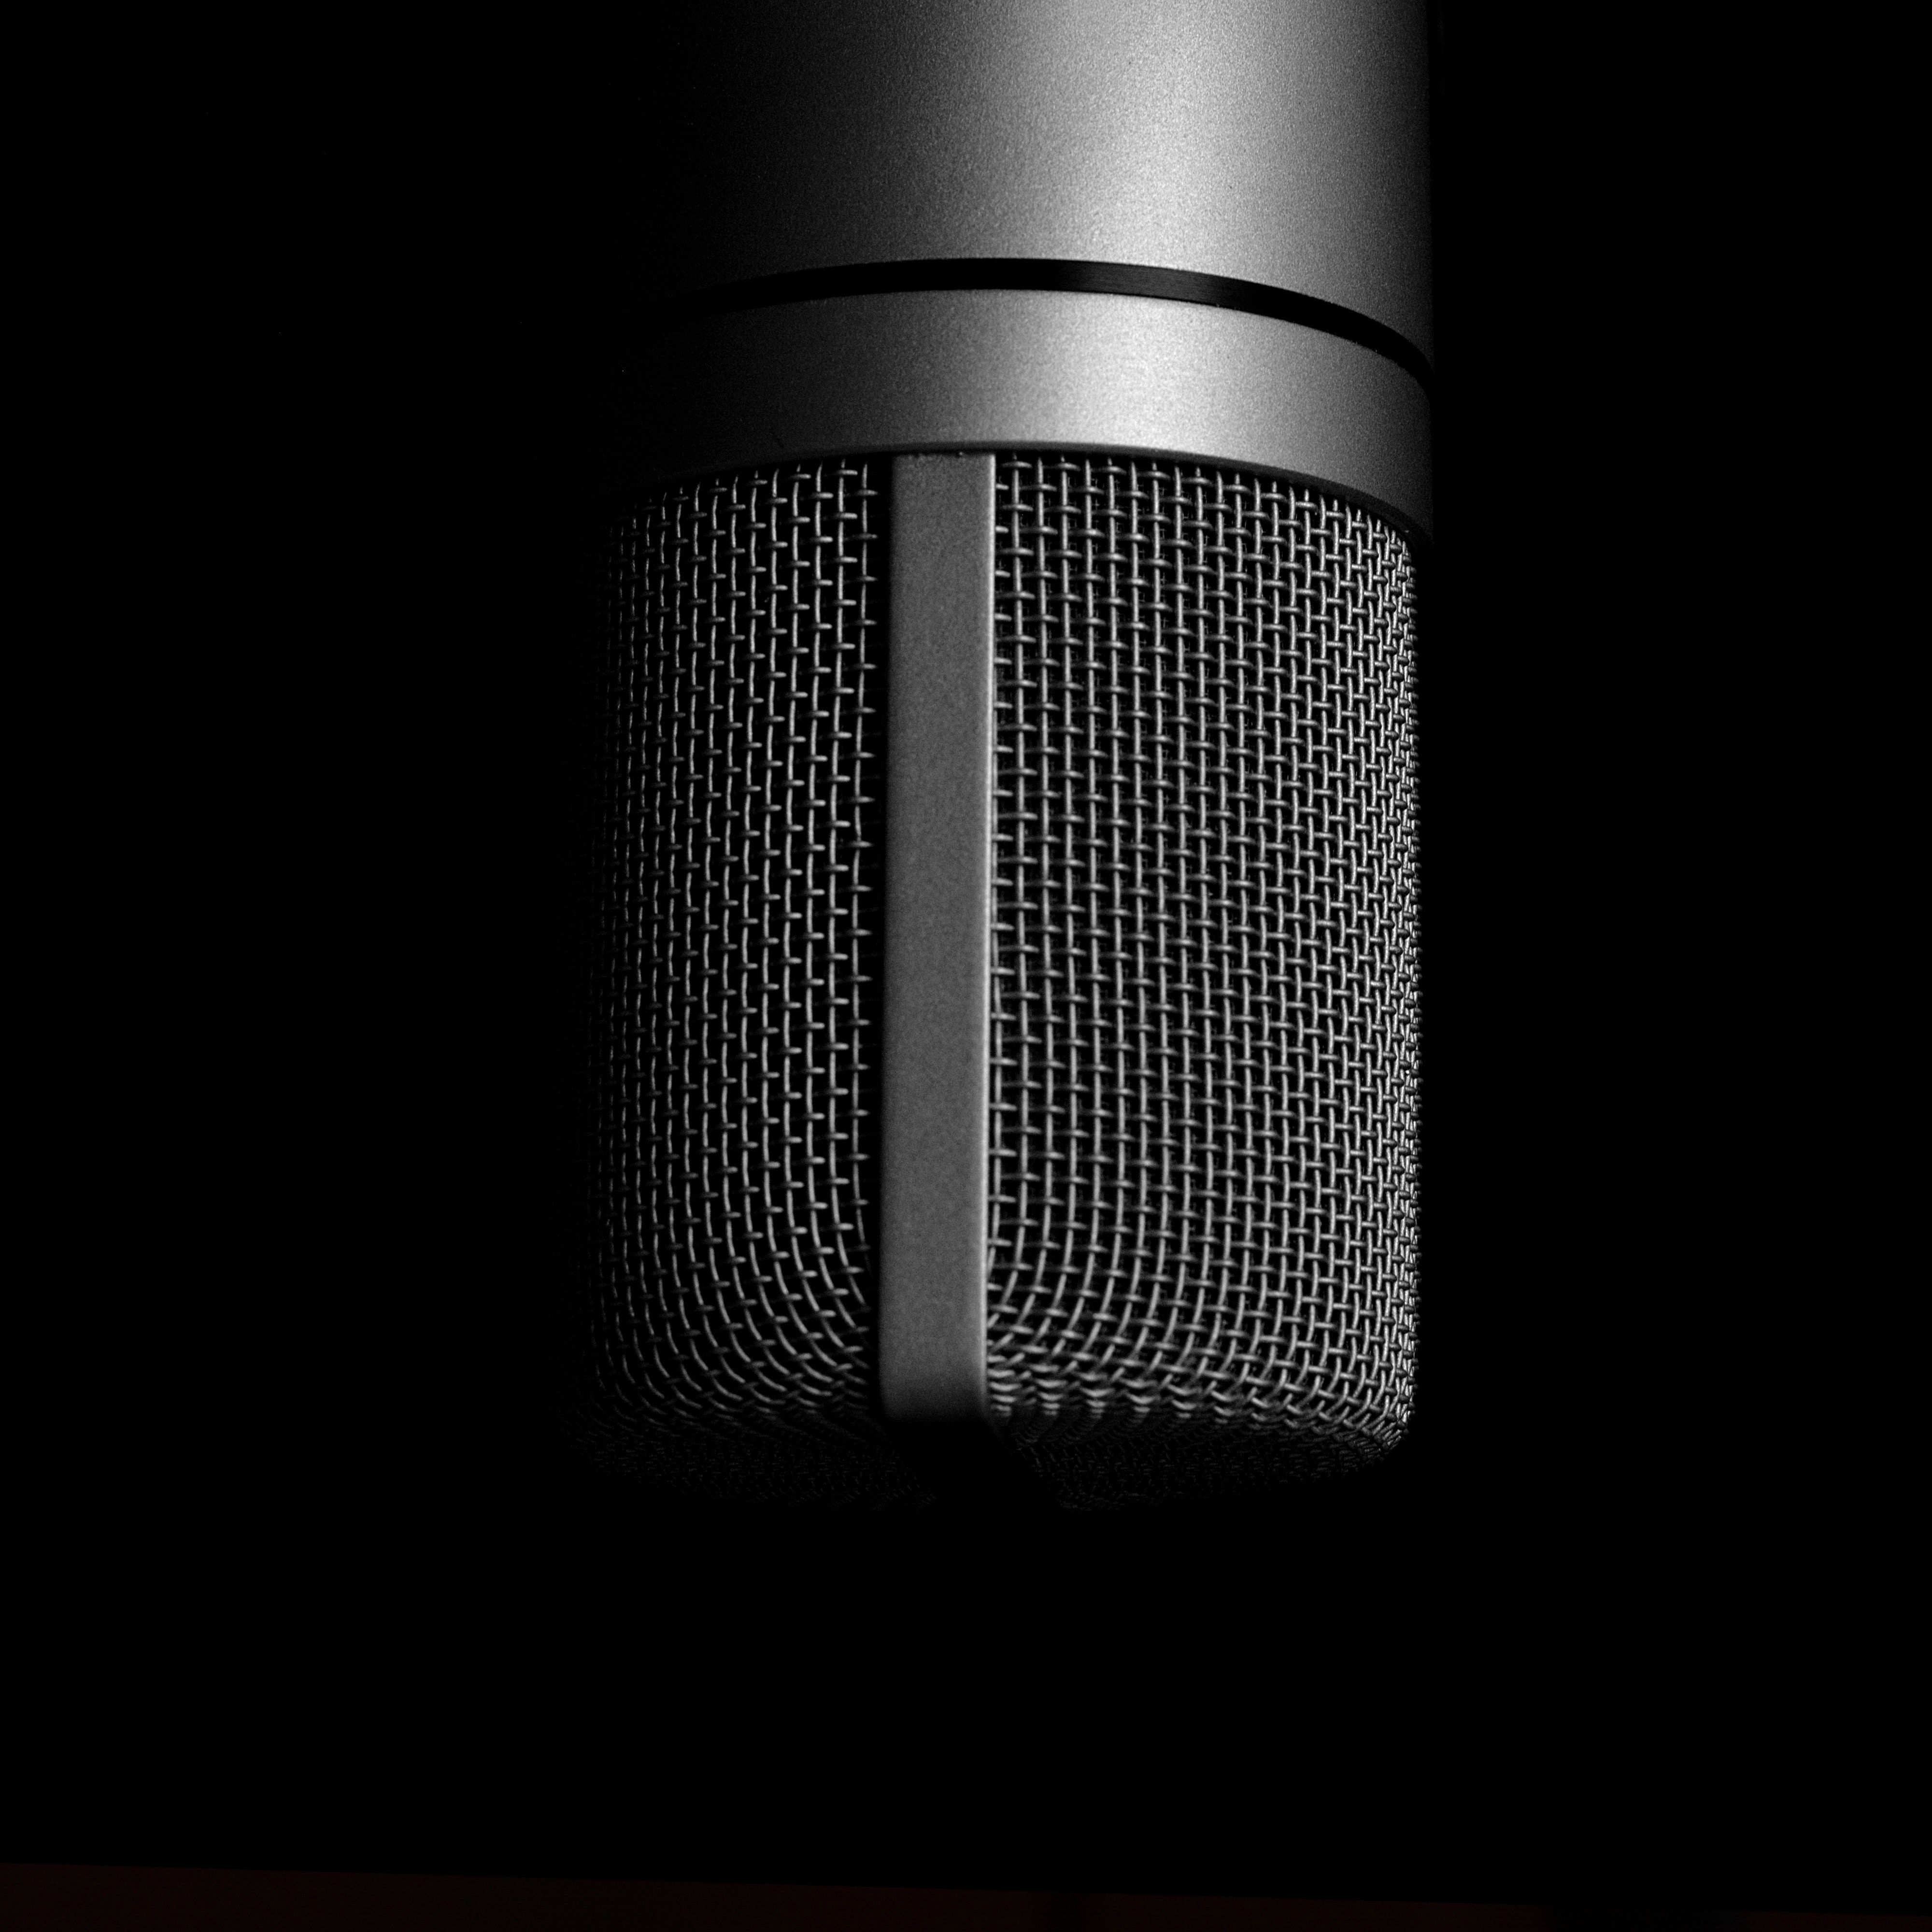 Grey Condenser Microphone Close Up Photography · Free